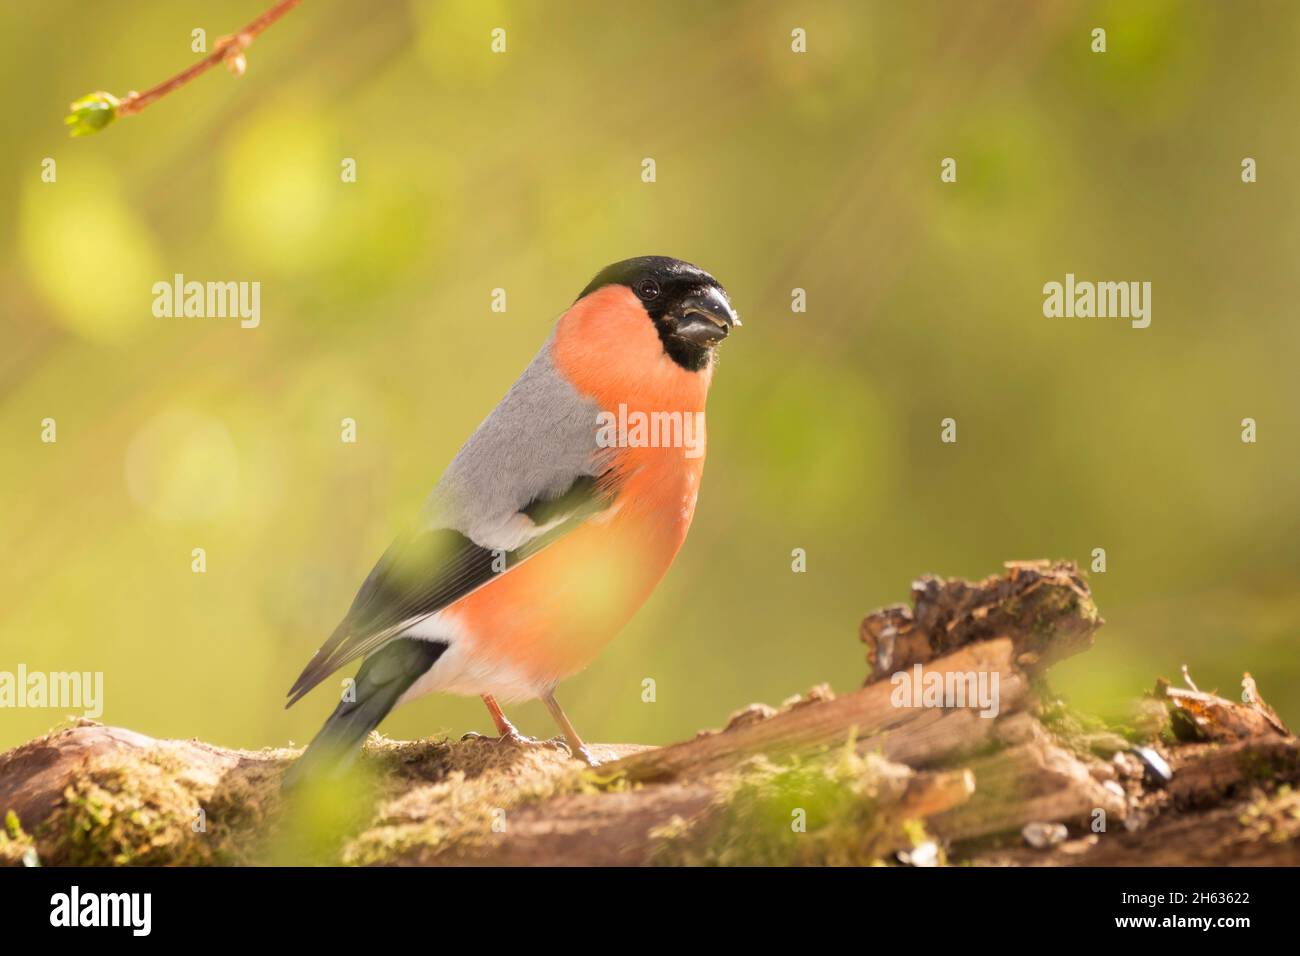 profile and close up of a male bullfinch behind leaves Stock Photo